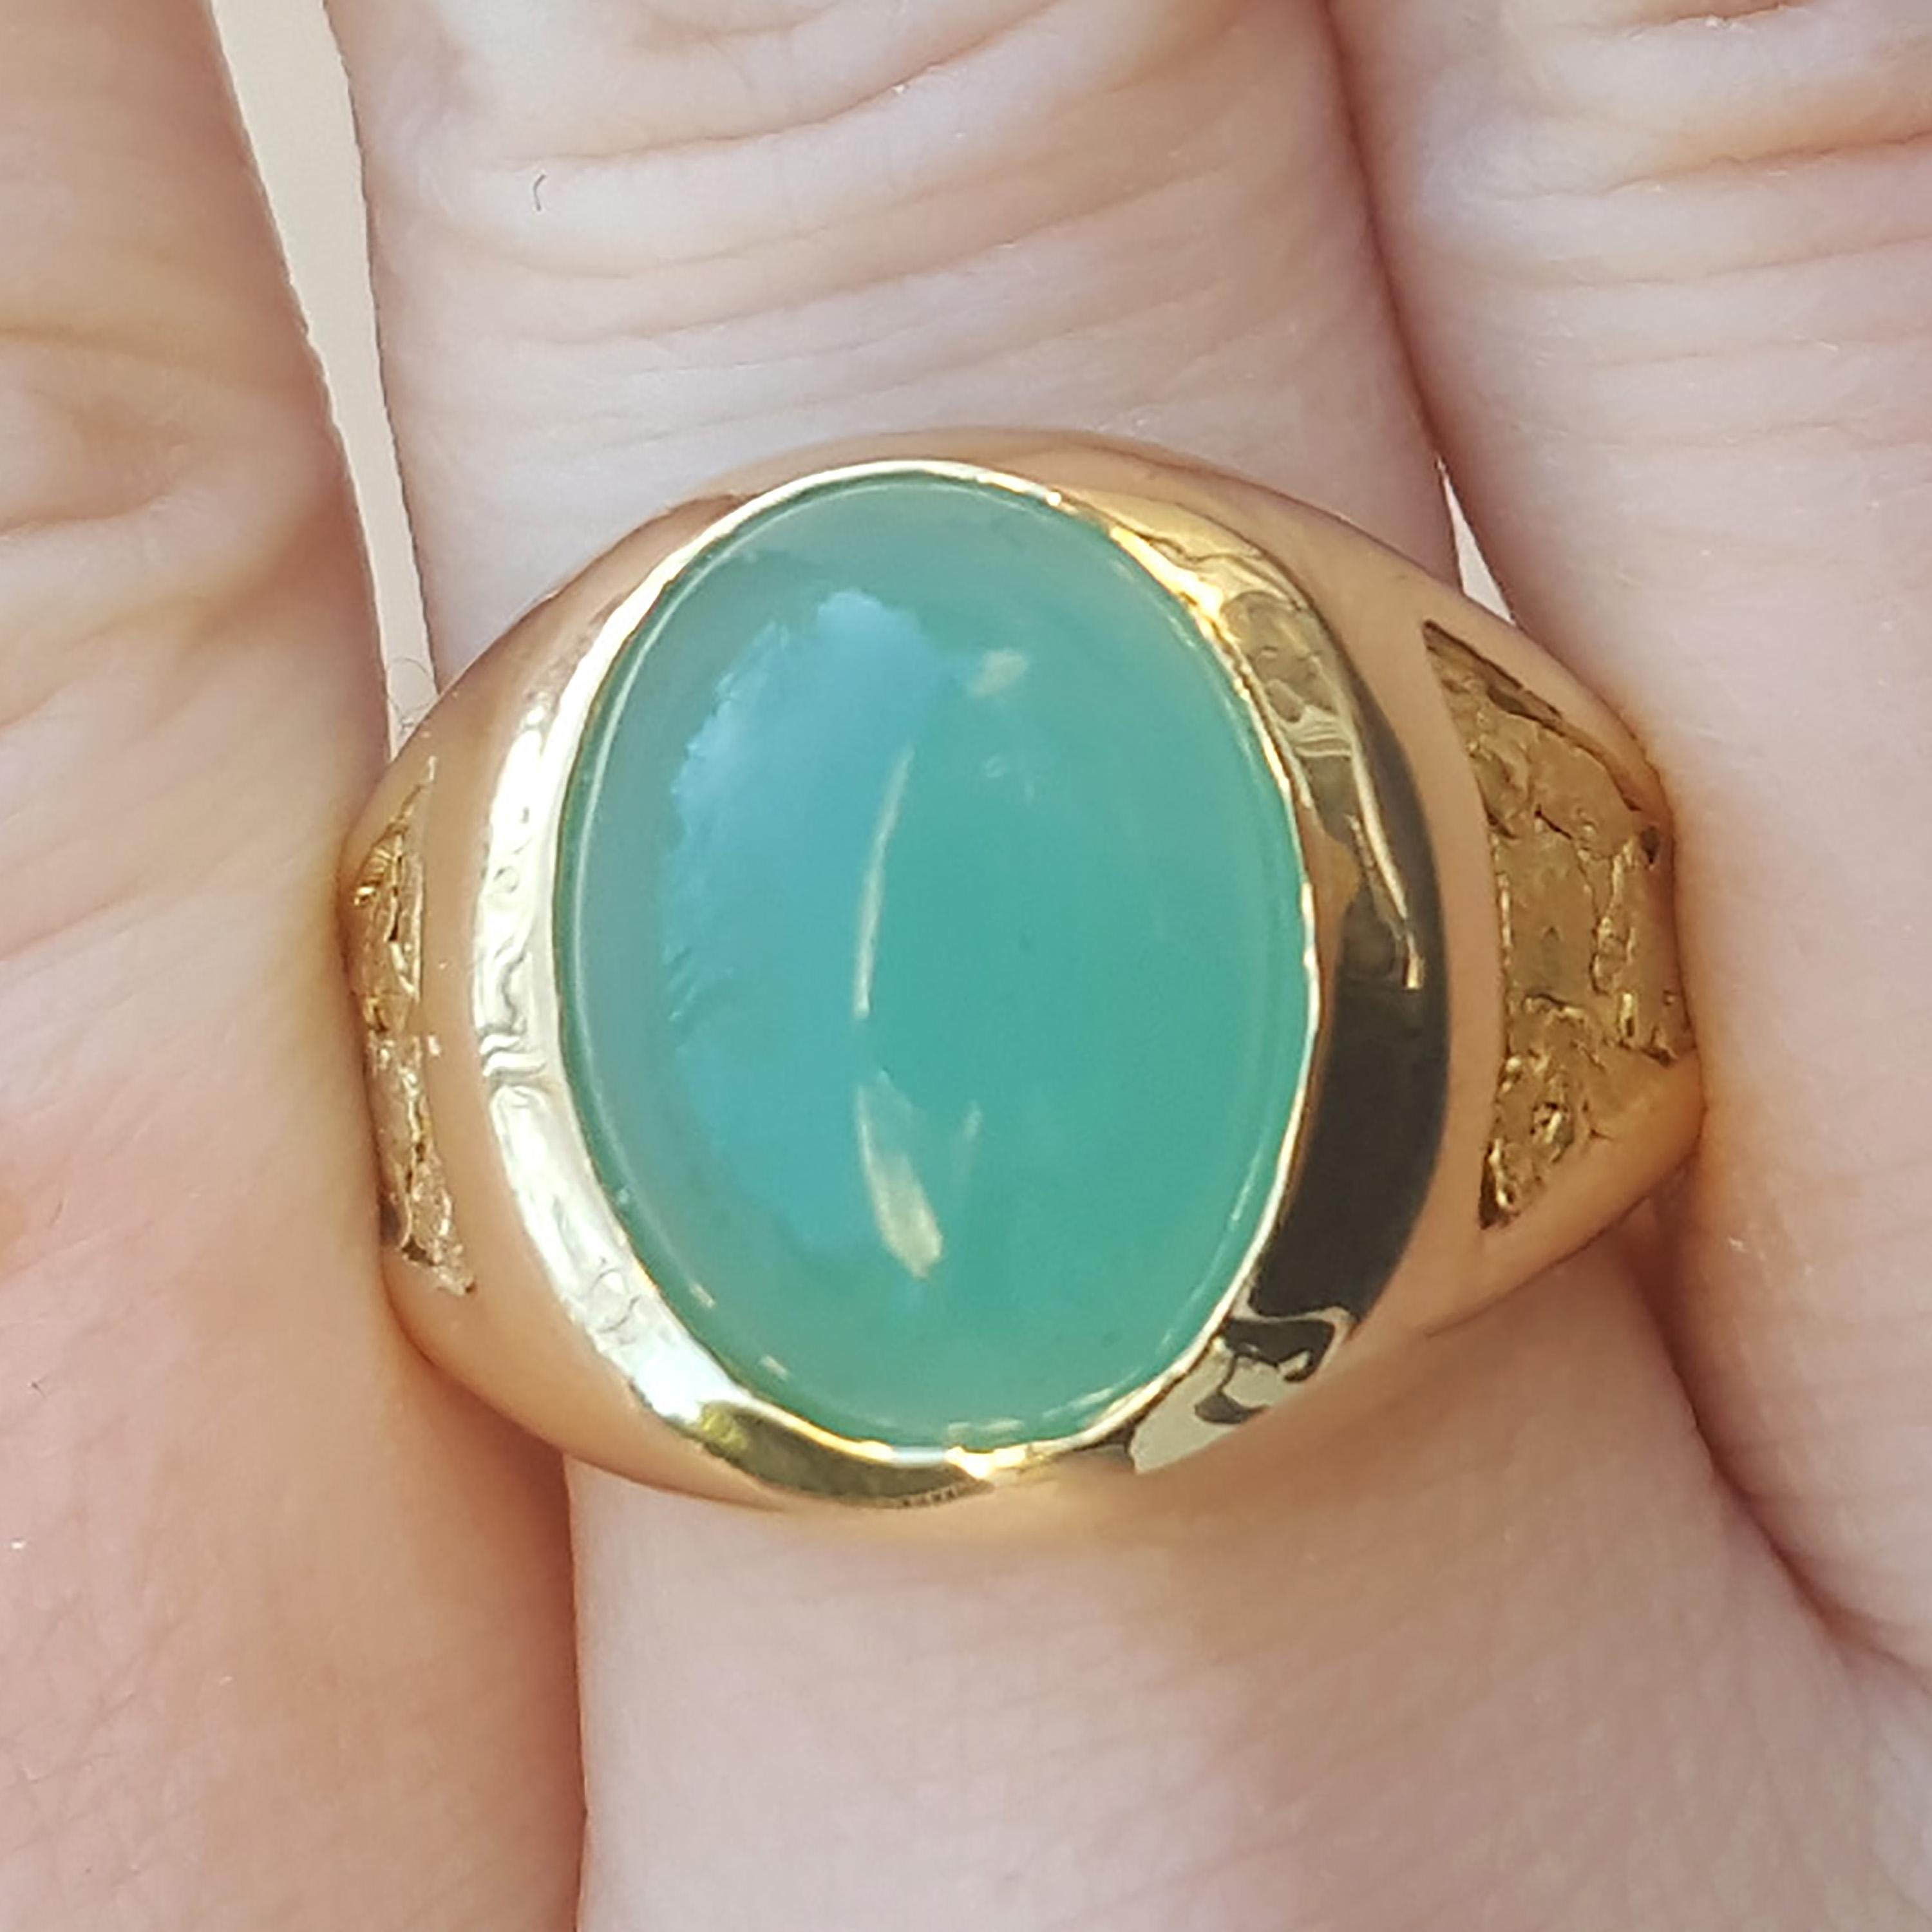 This rare piece of naturally colored chrome chalcedony, found in Zimbabwe in the 1980s, adds a bright and unexpected twist to a classic men’s 18kt ring. The gorgeous natural gold nuggets add rich texture.  This gentleman’s ring is an elegant